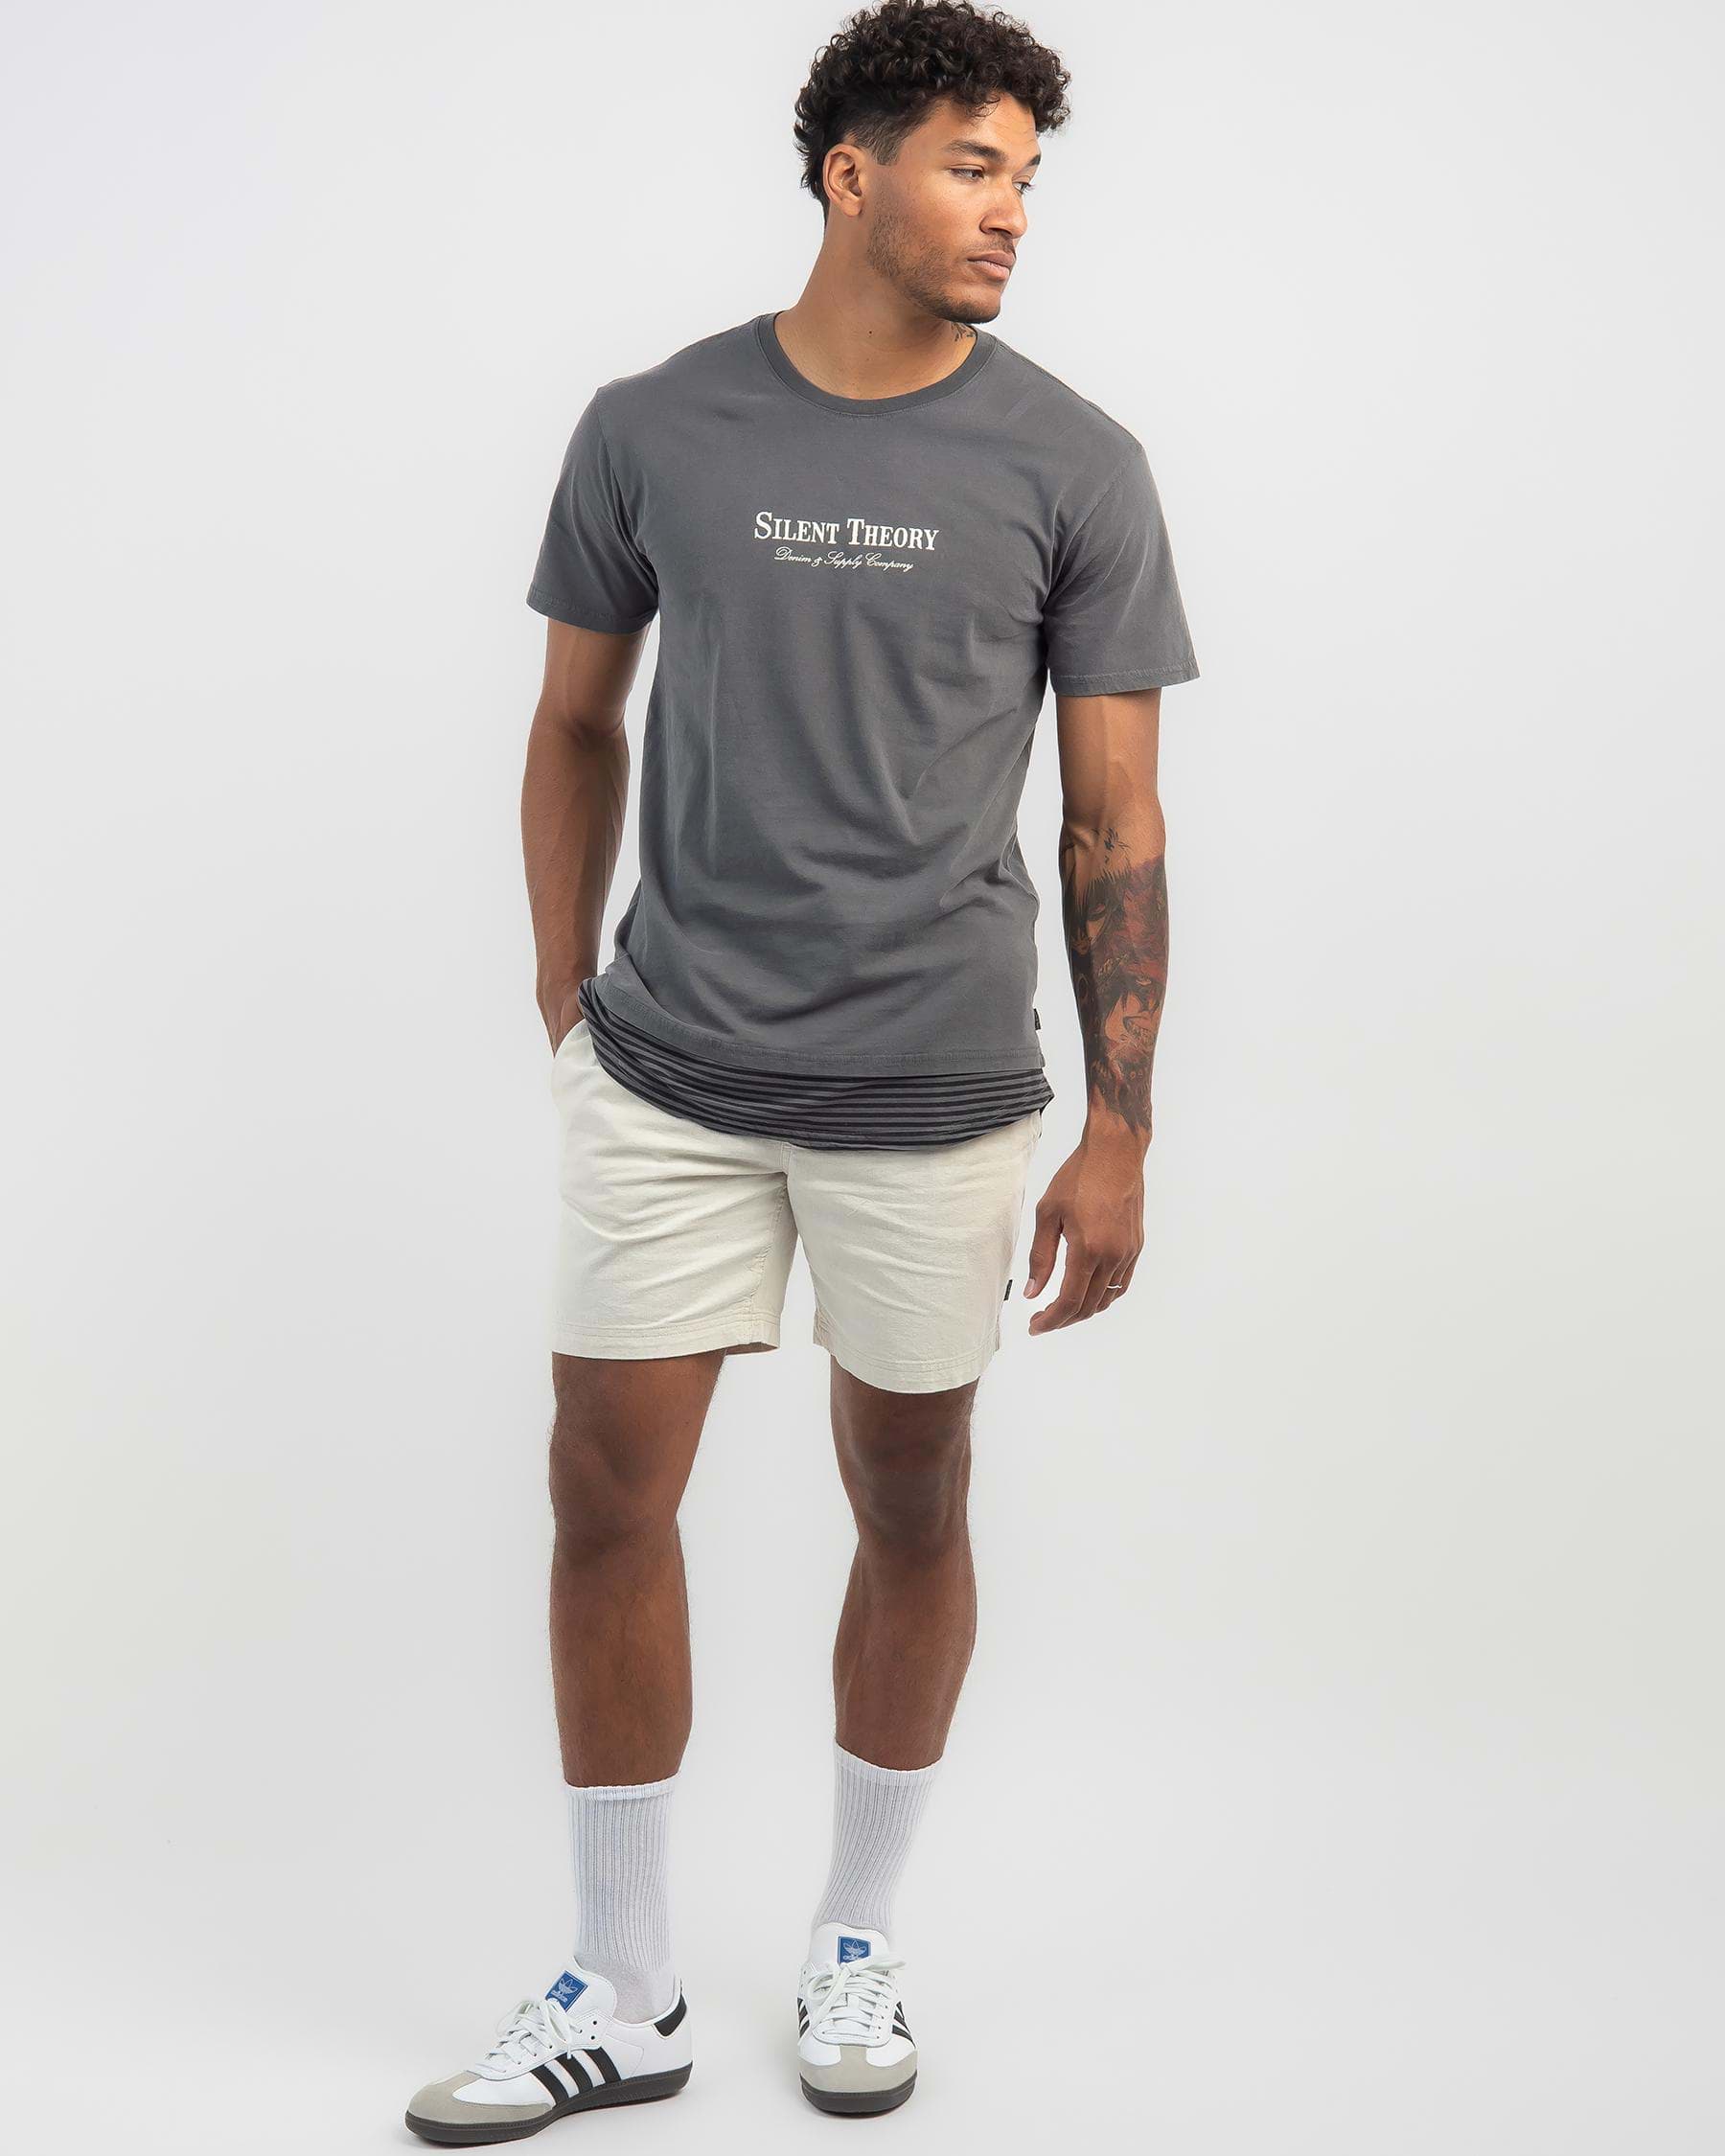 Silent Theory Hemp Ew Shorts In Natural - Fast Shipping & Easy Returns ...